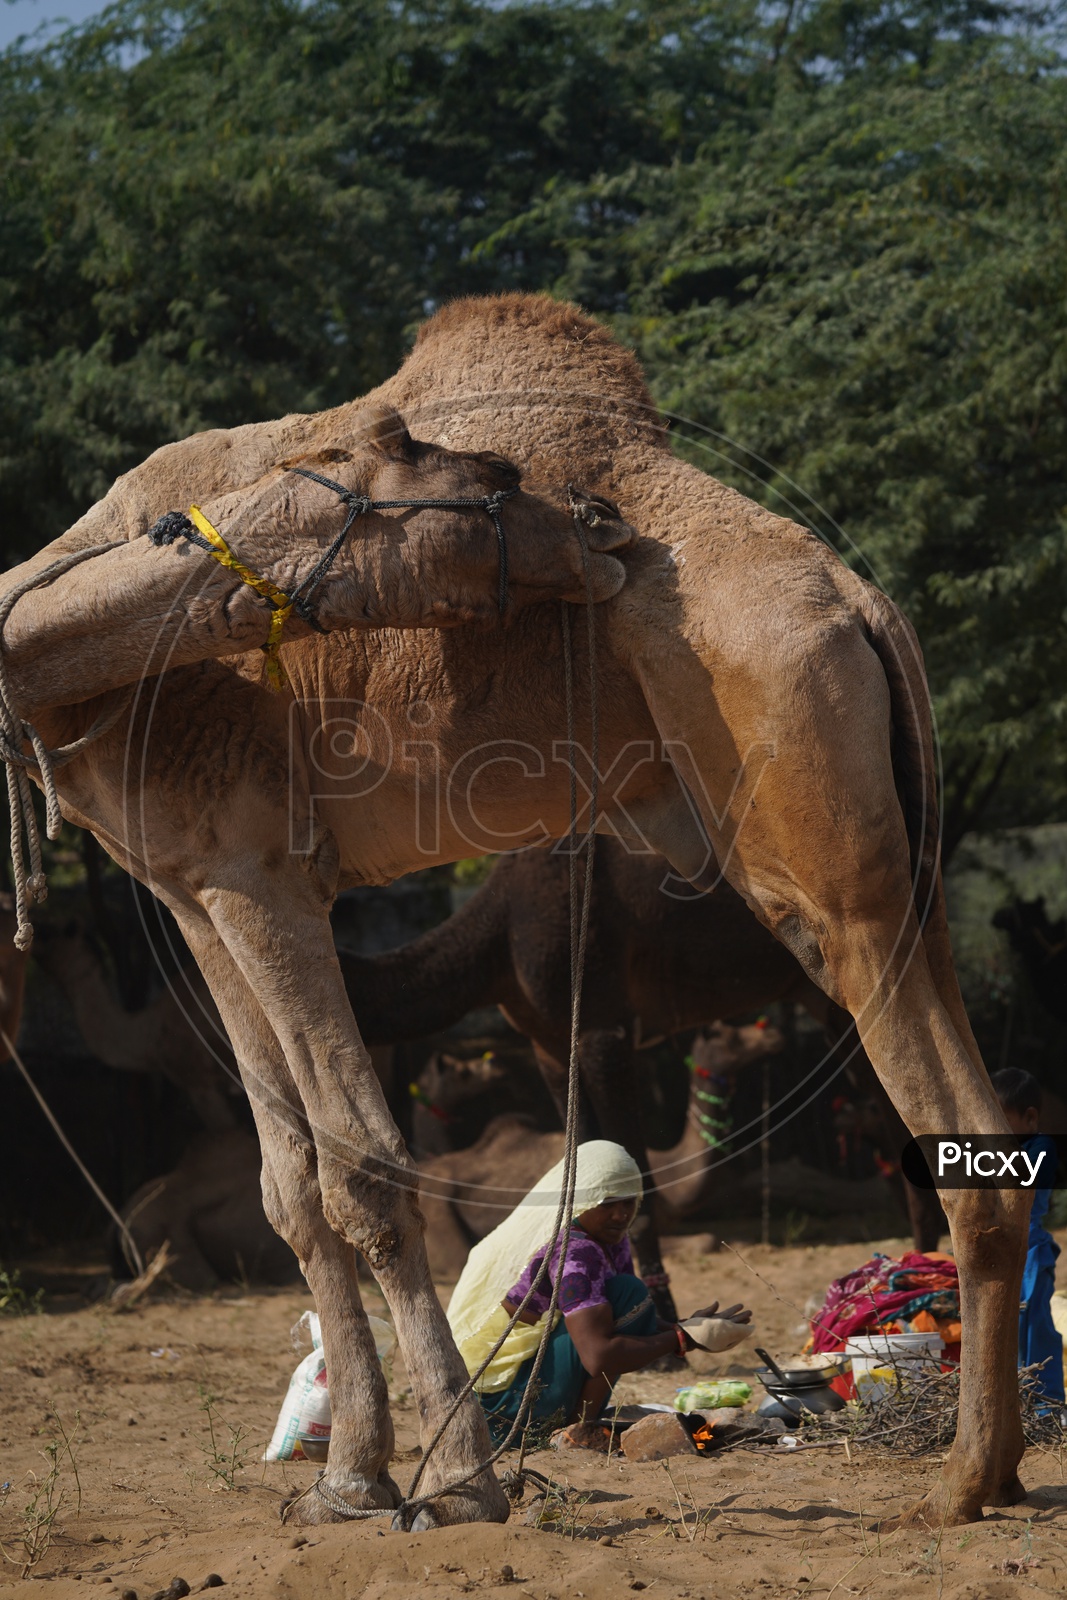 A Woman Preparing Her Daily Bread Spotted  in Pushkar Camel Fair